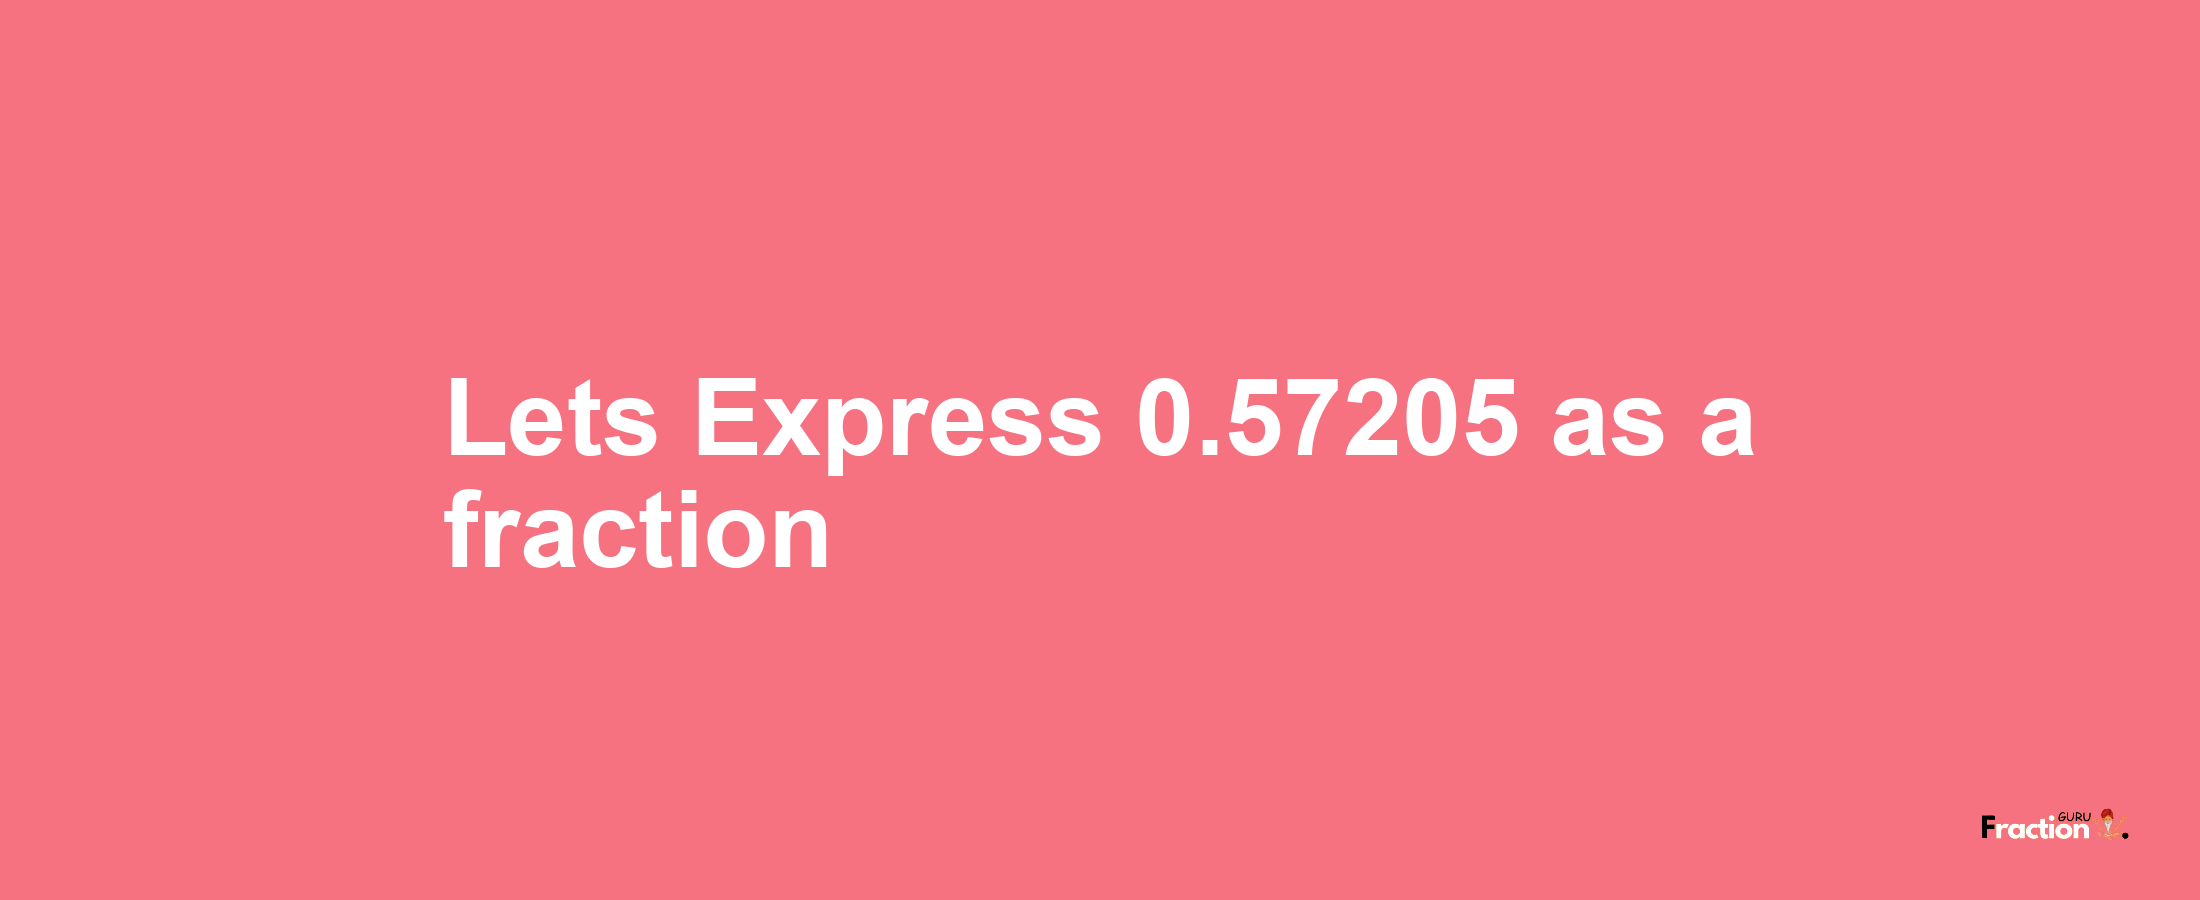 Lets Express 0.57205 as afraction